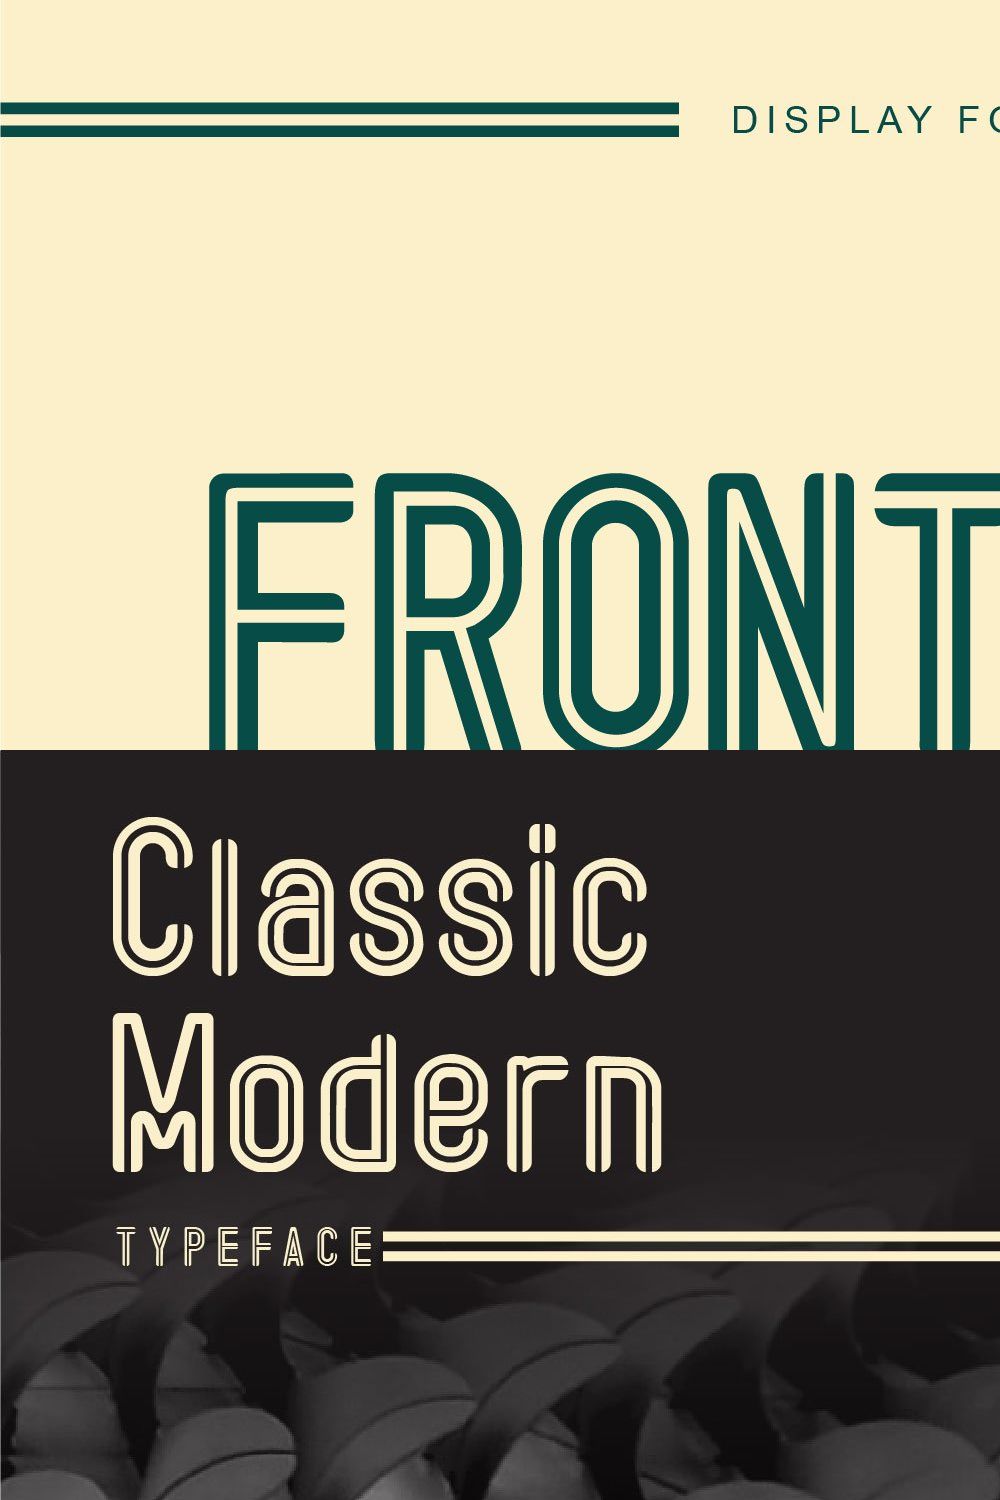 frontline classic font pinterest preview image.